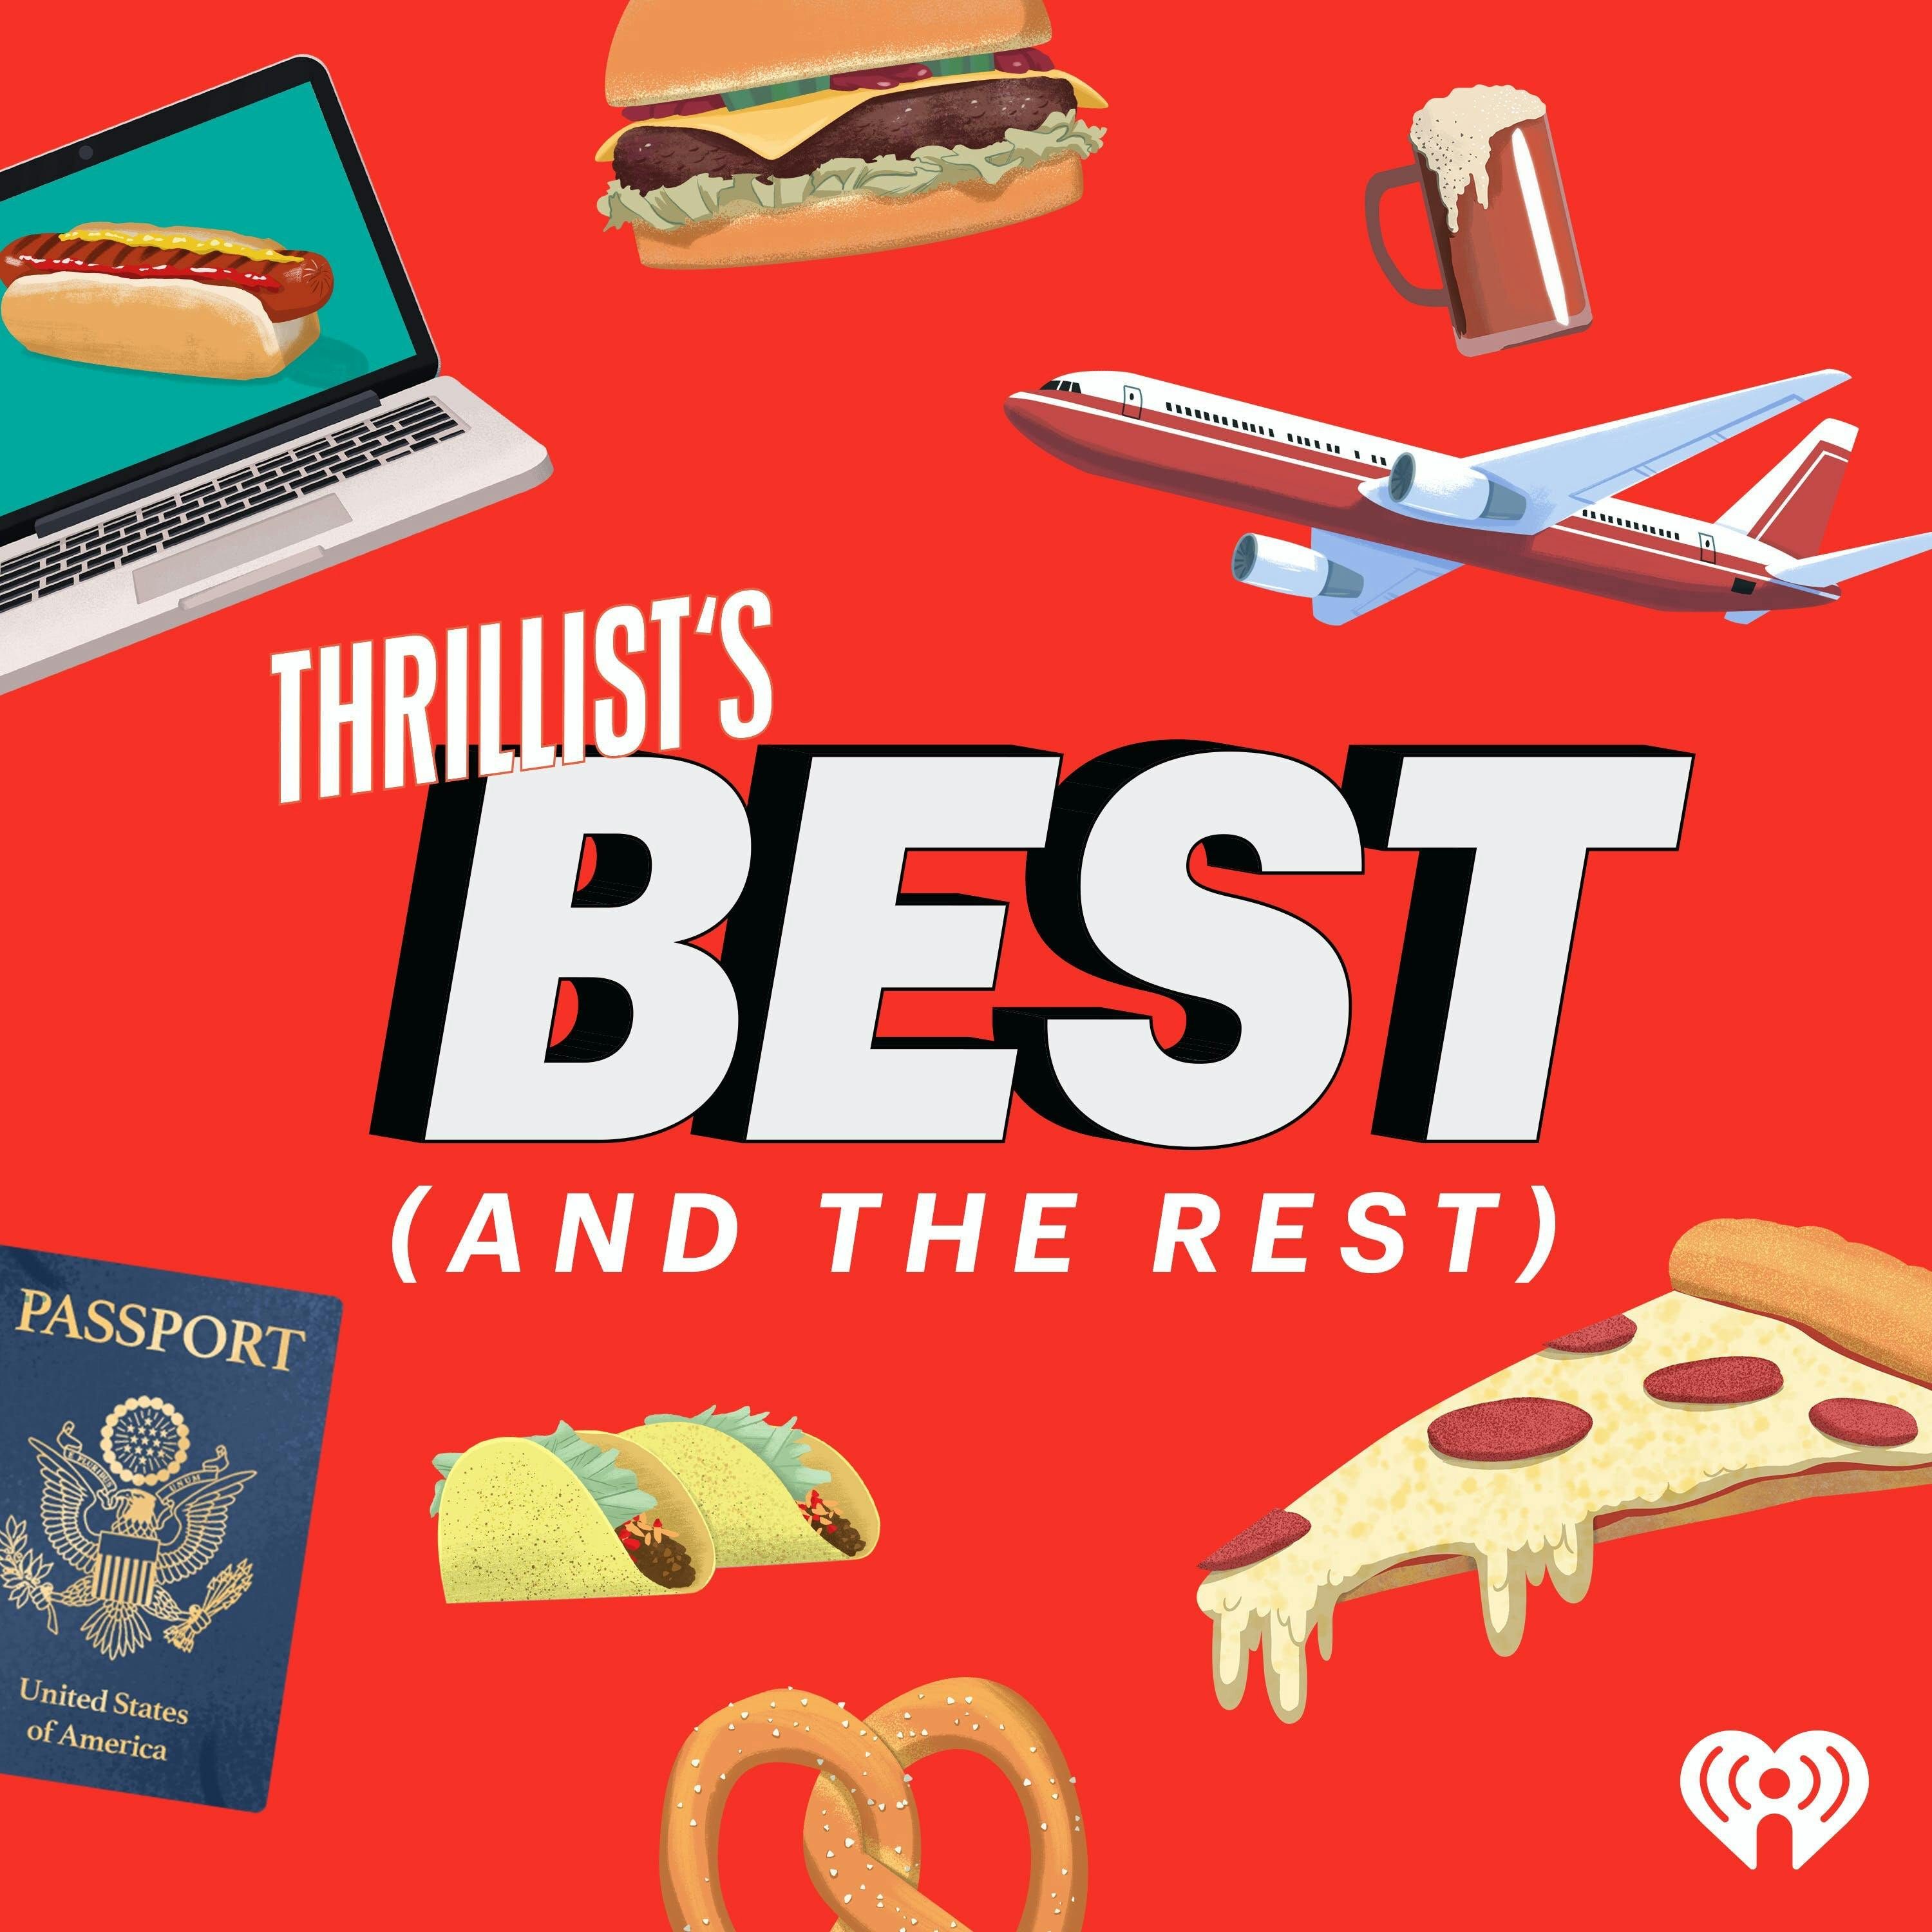 THRILLIST’S BEST: All the Gear (and Advice) You Need For Your First Hiking/Camping Trip